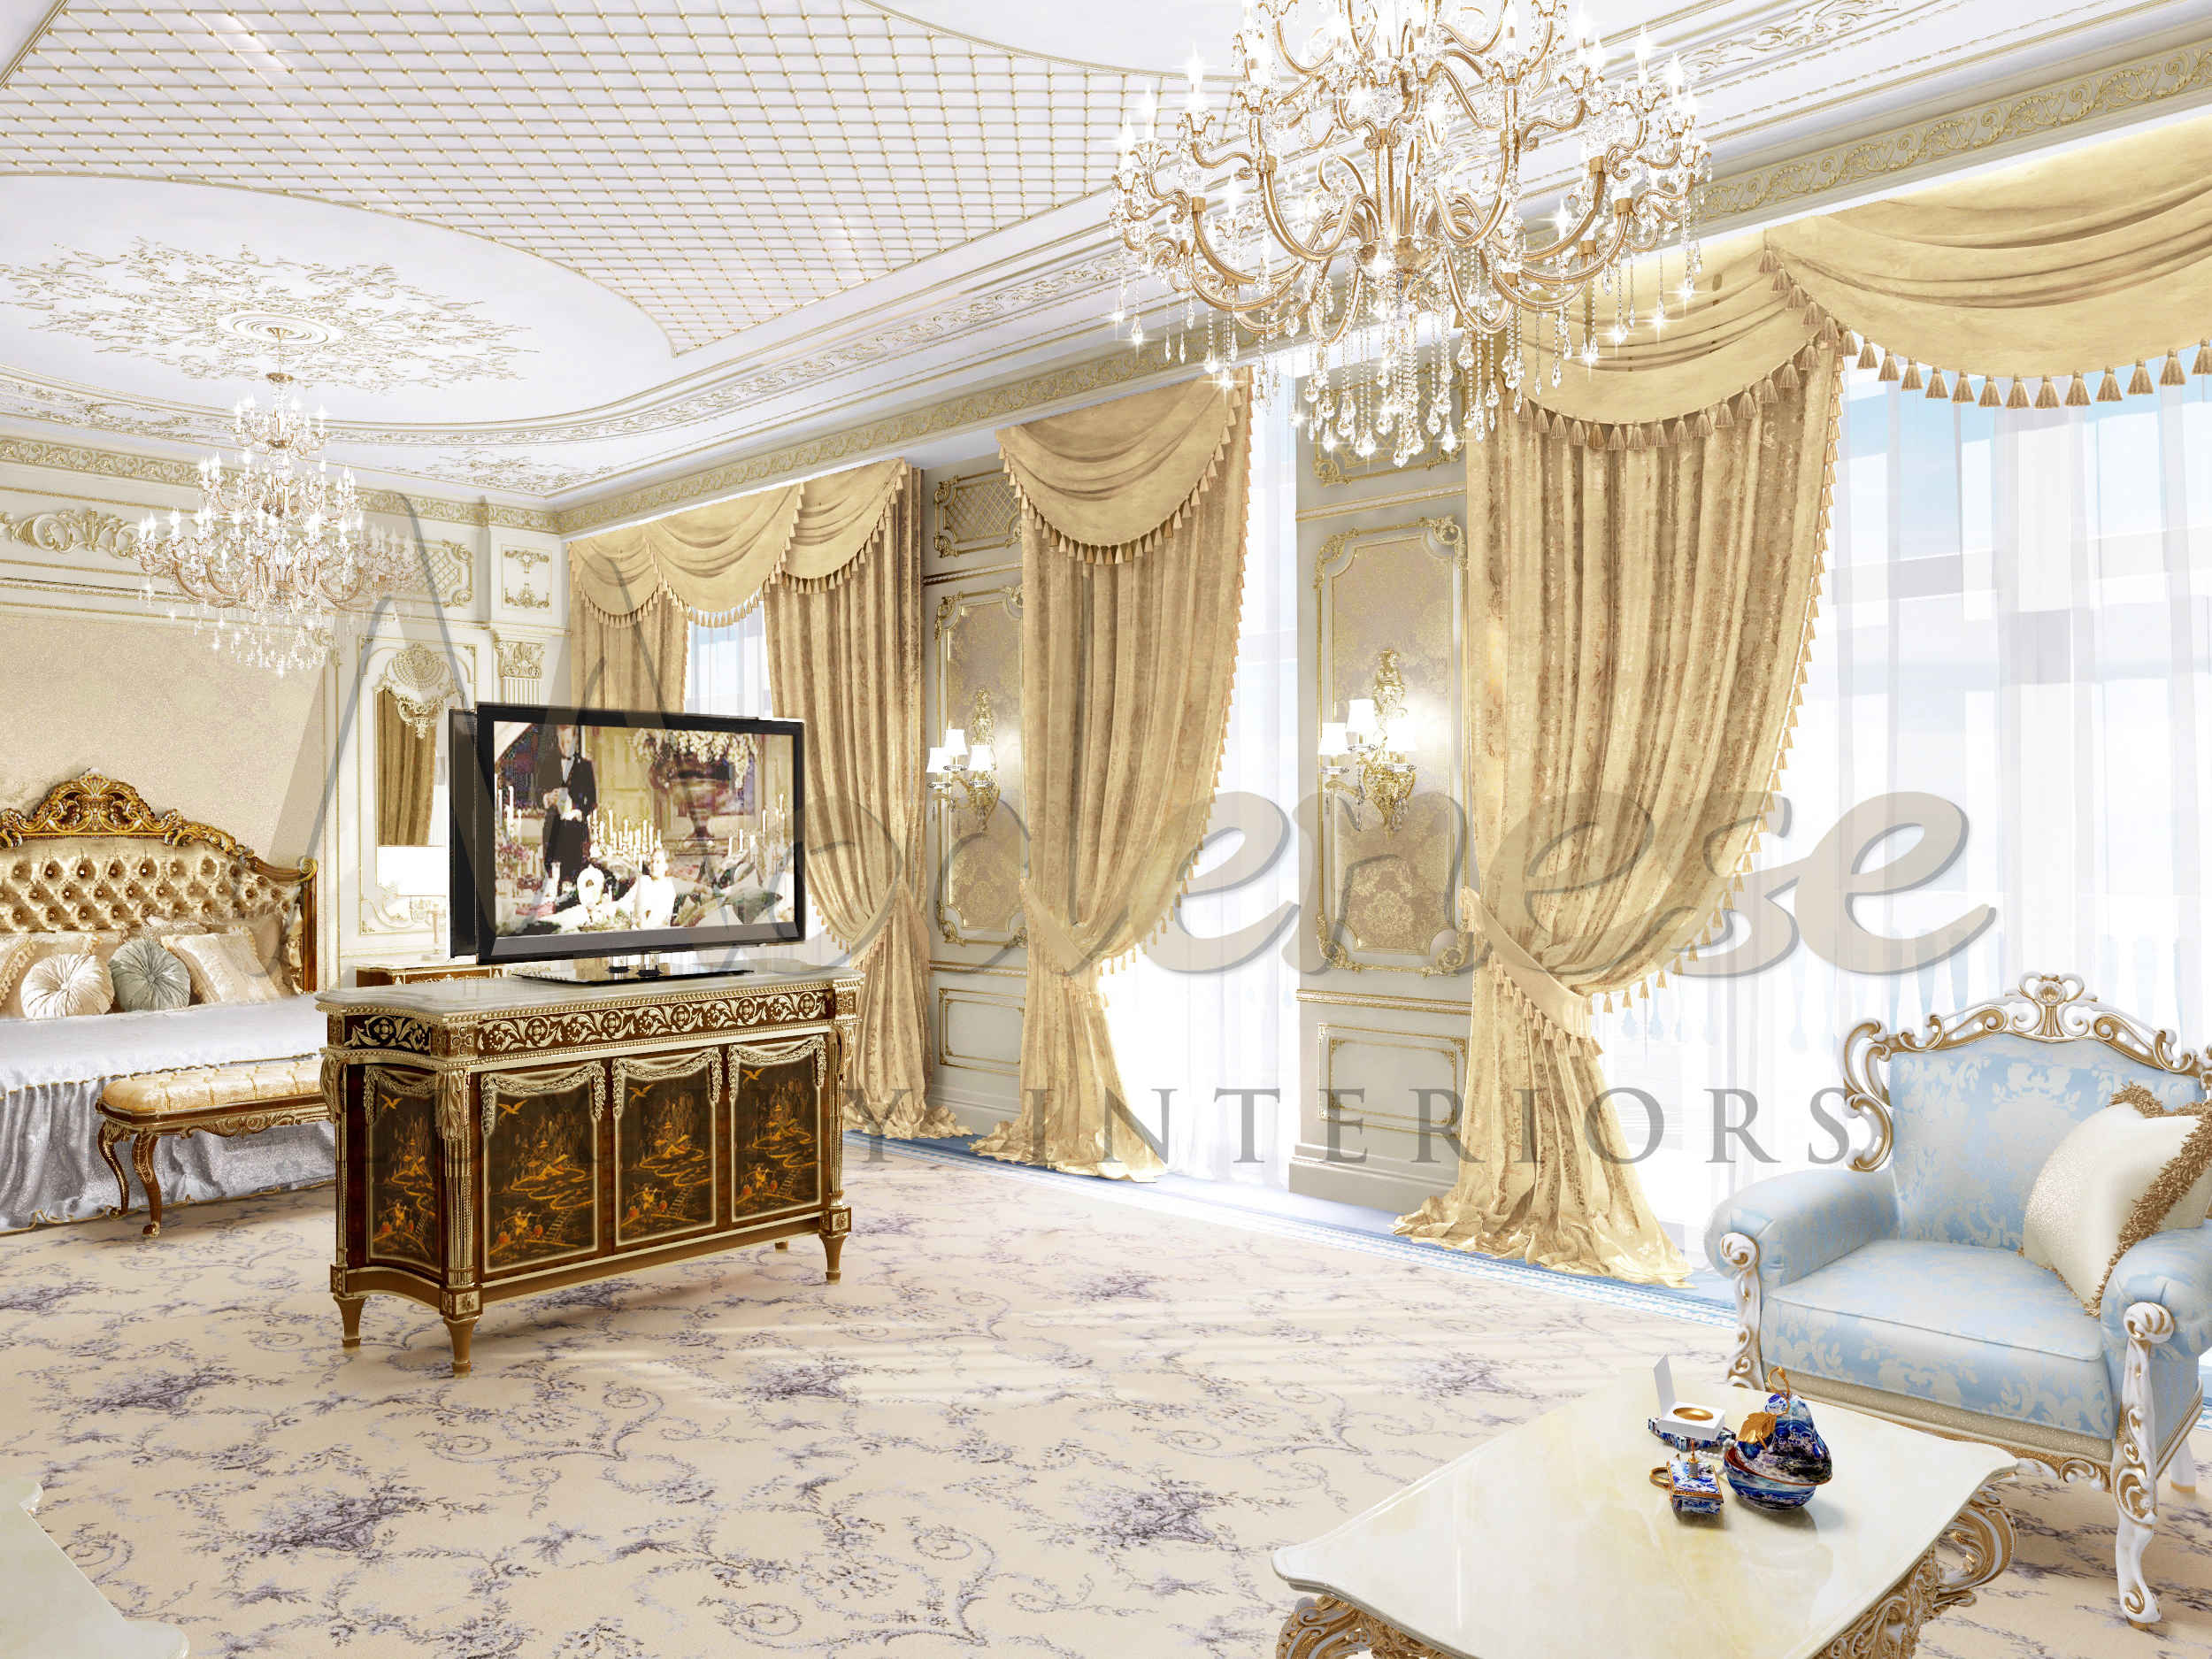 High-end quality, premium standards, luxury furniture design made in Italy. Master Bedroom Design For Villa In Riyadh. Traditional handcrafted furniture and best classical interior design projects.